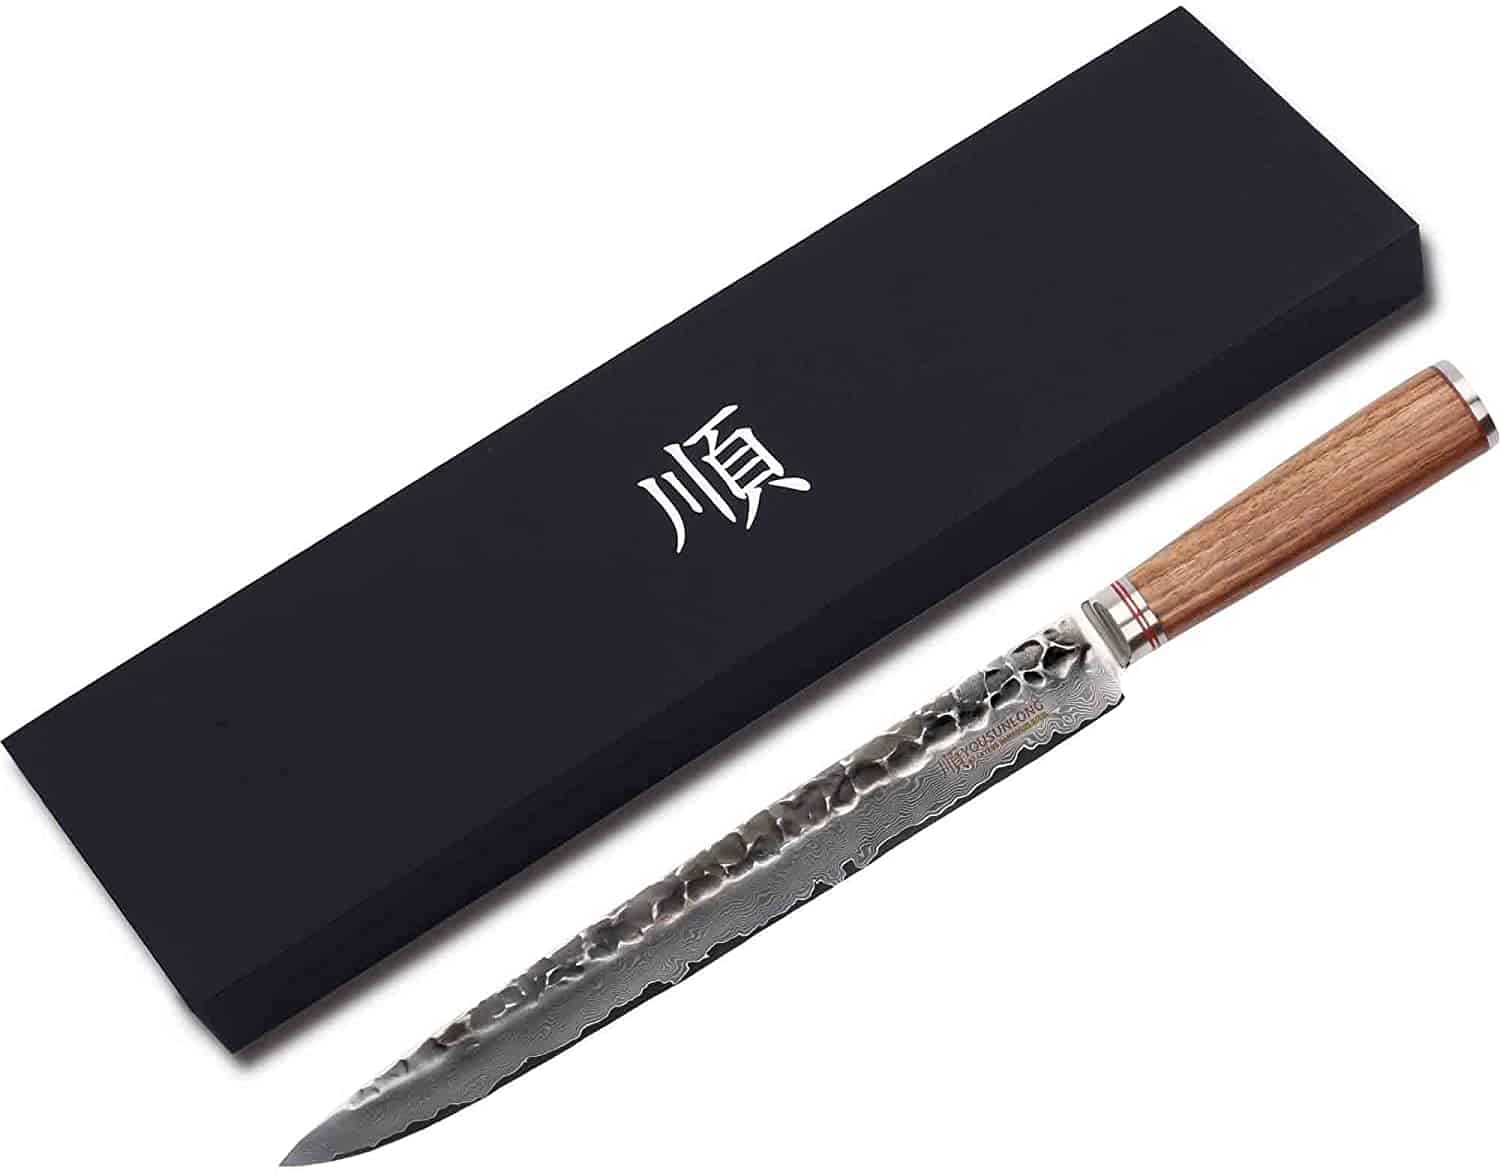 Best yanagiba knife with hammered finish- YOUSUNLONG Fillet knife 12 inch Max with box